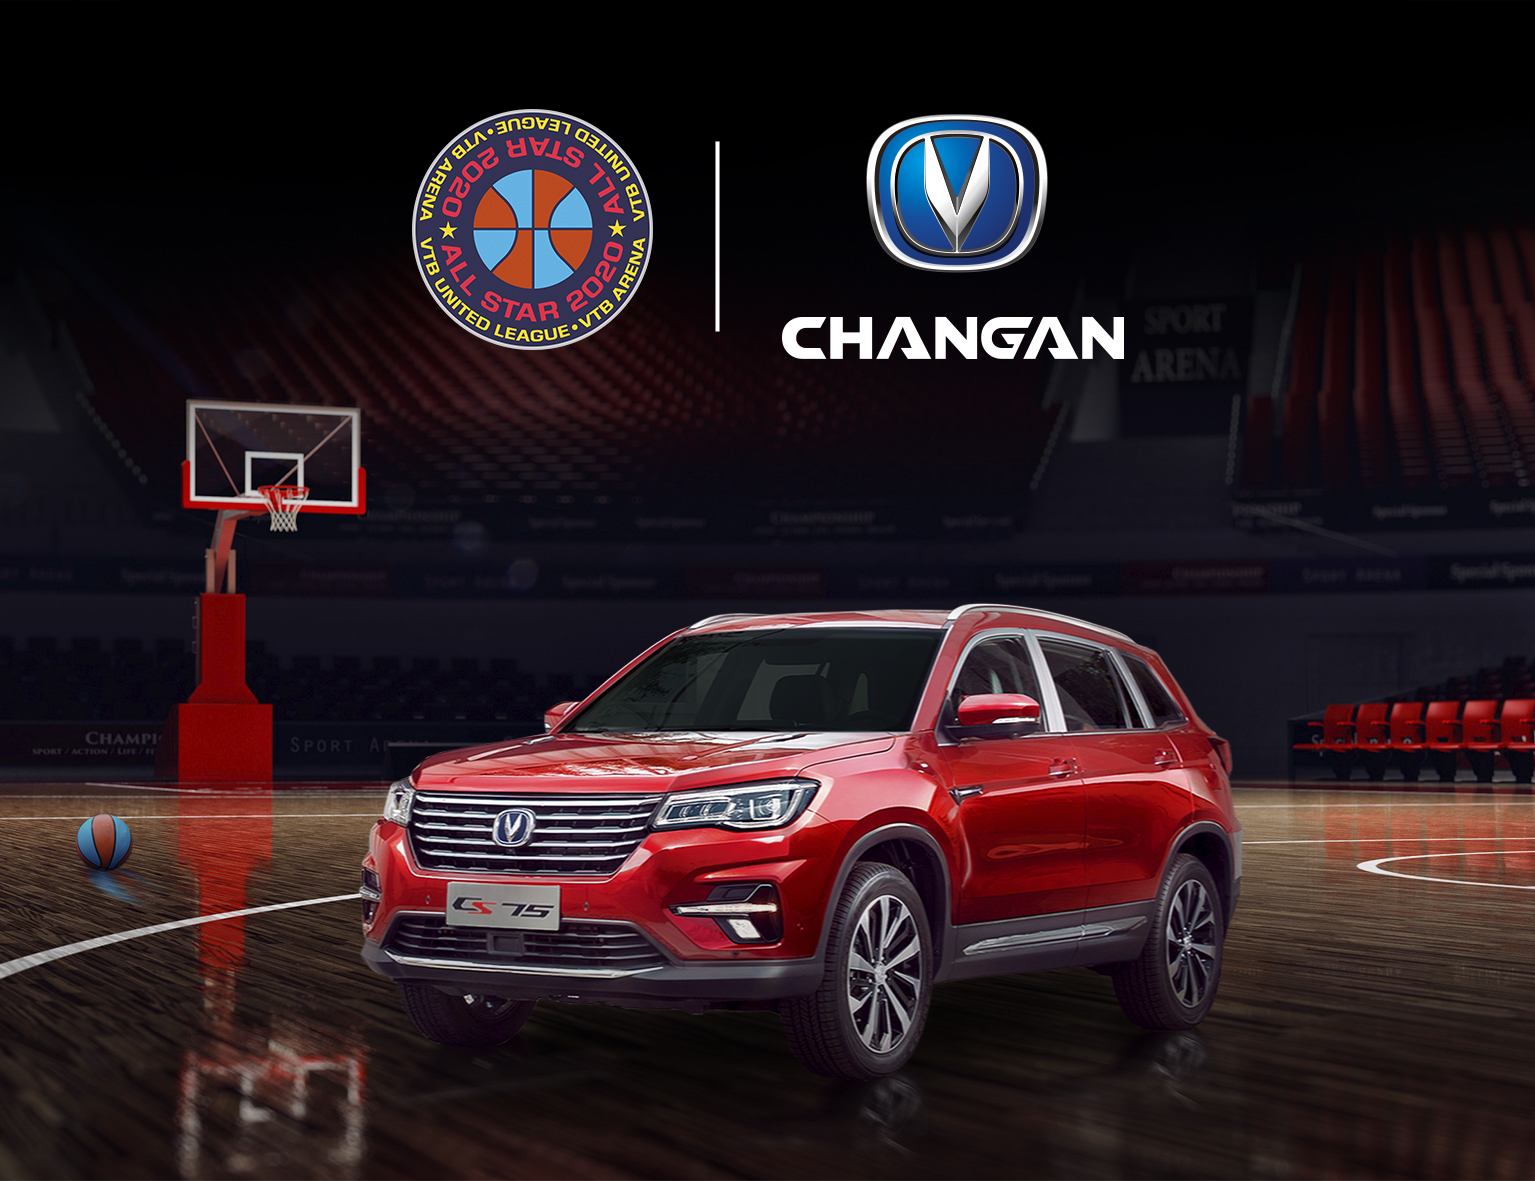 Challenge by VTB United League and Changan